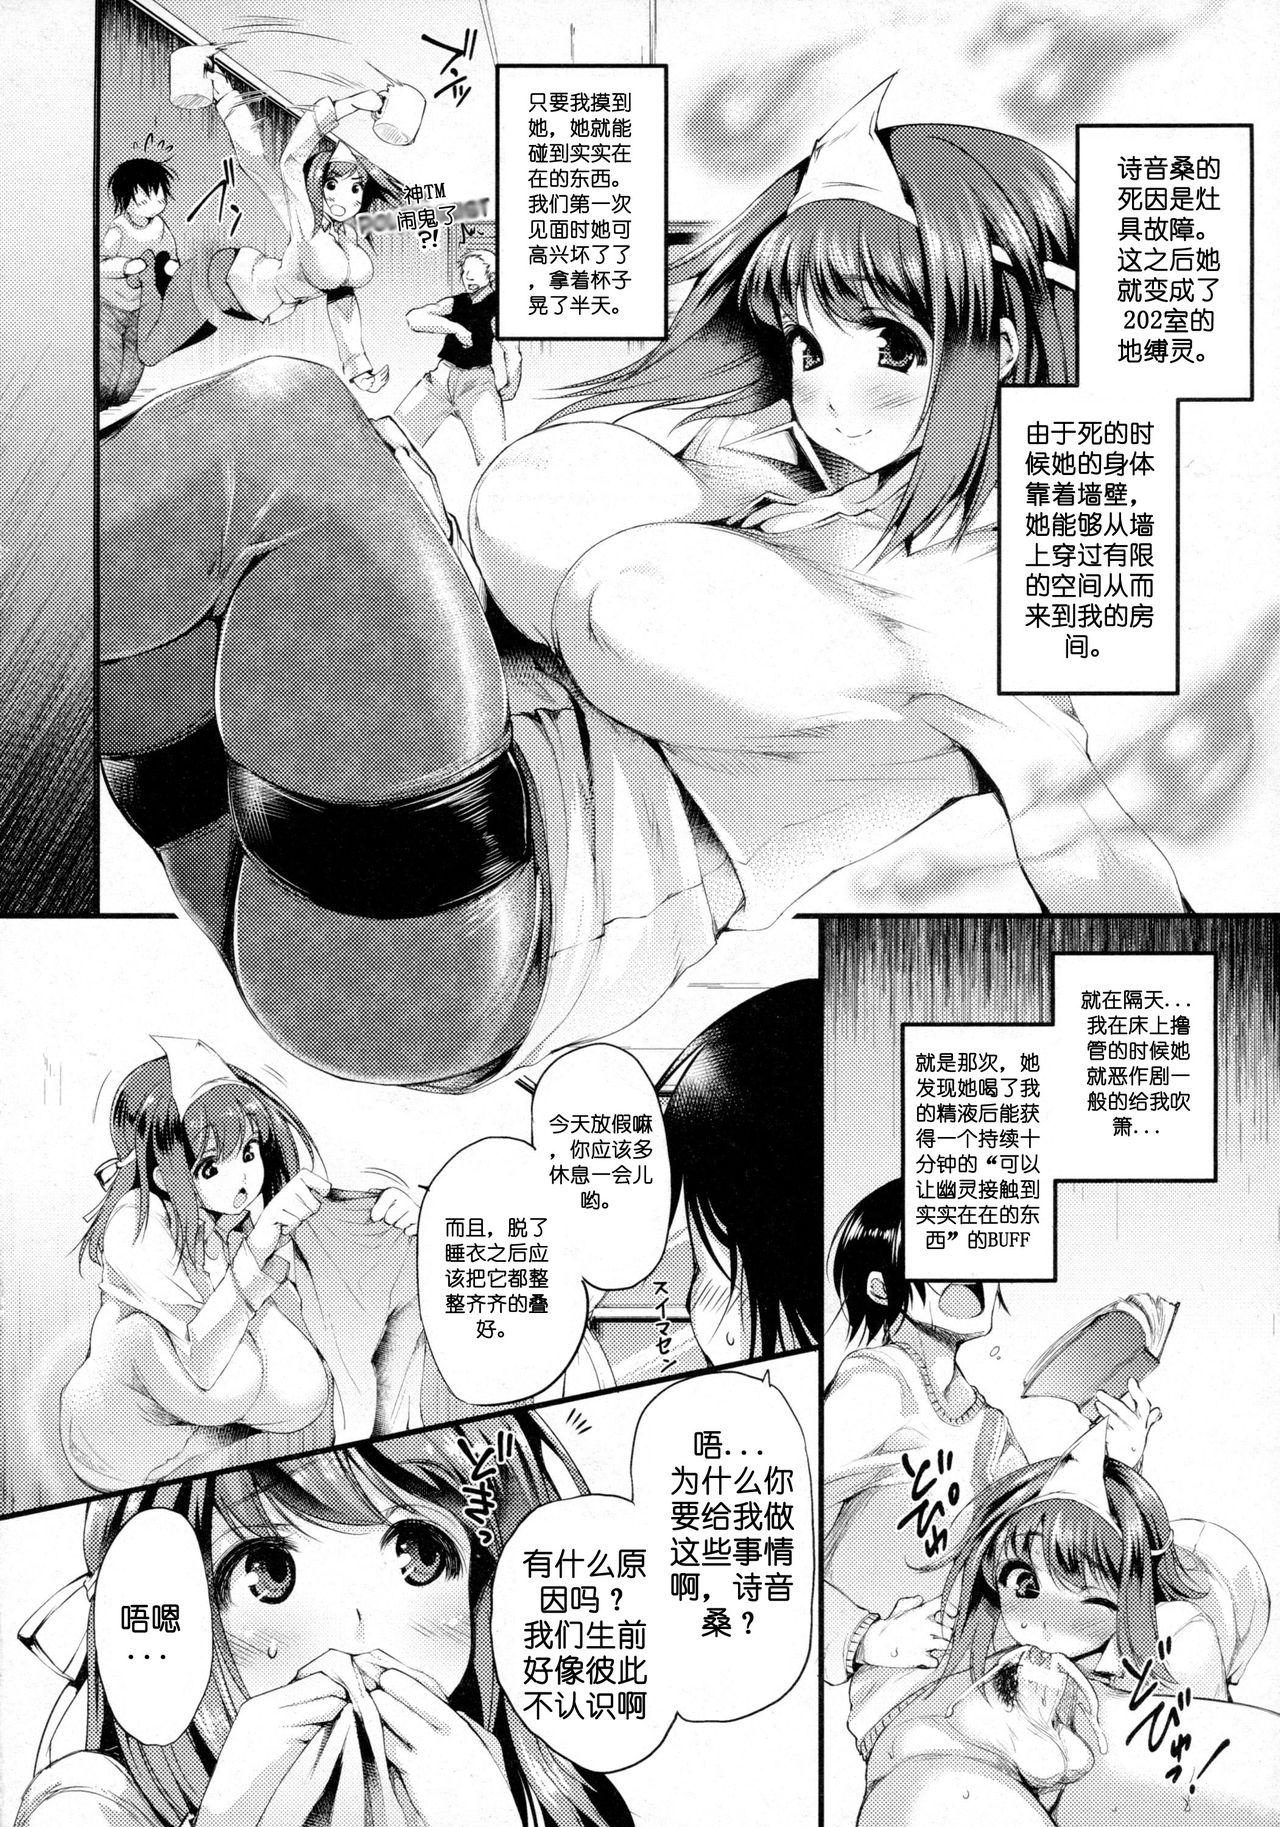 [Oohira Sunset] 202-Goushitsu no Yuurei-san | The Ghost in Room 202 (COMIC Unreal 2016-02 Vol. 59) [Chinese] [简称天子个人汉化] (Ongoing) 1